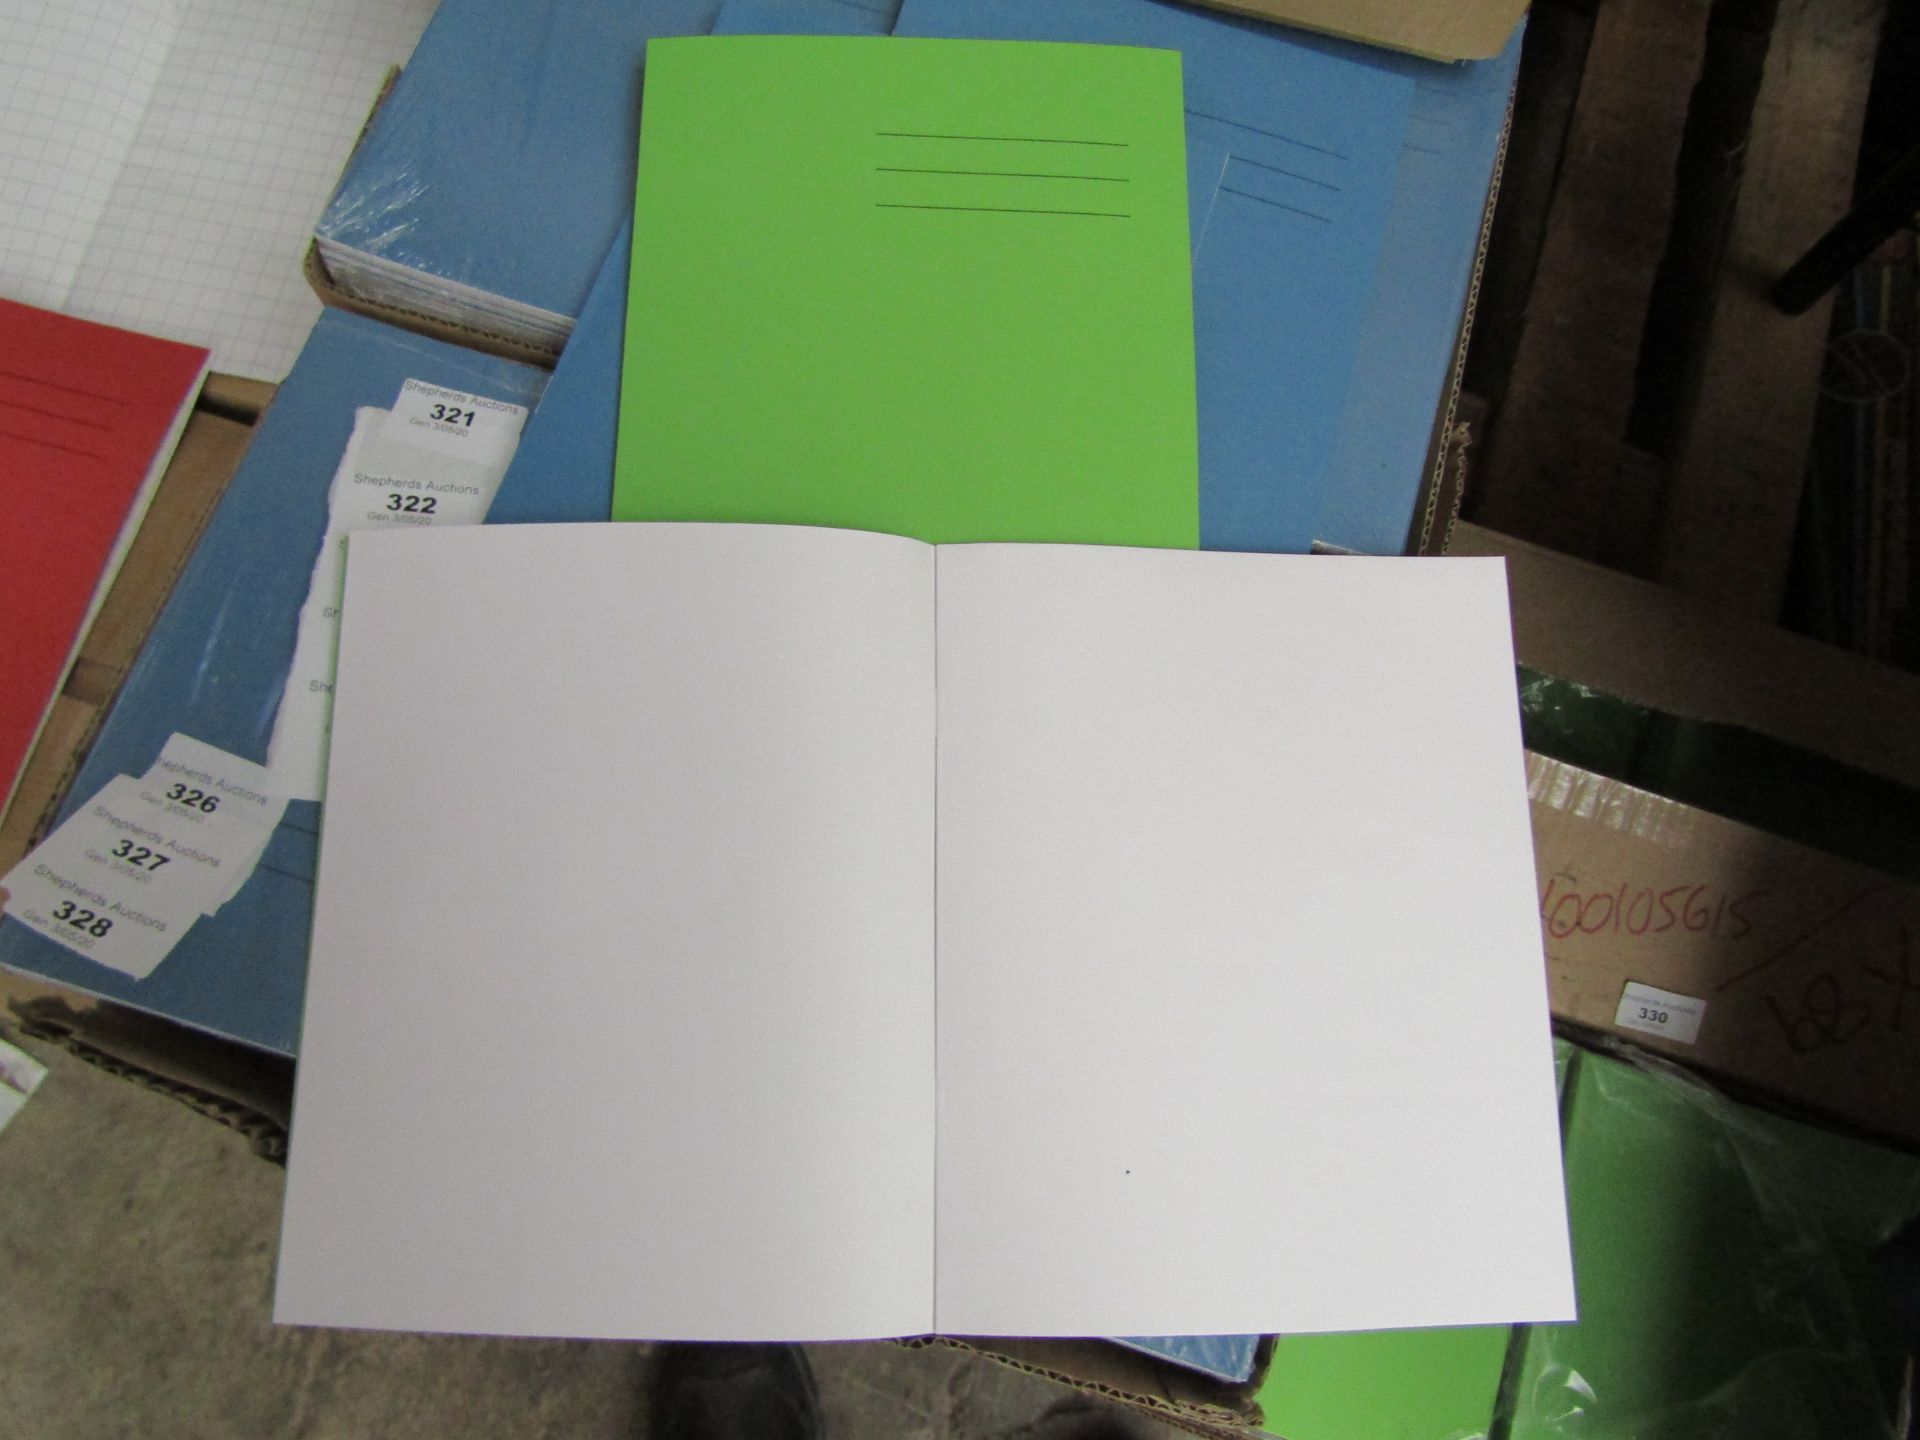 Box of 100 Exercise Books. New & Boxed. See image for design